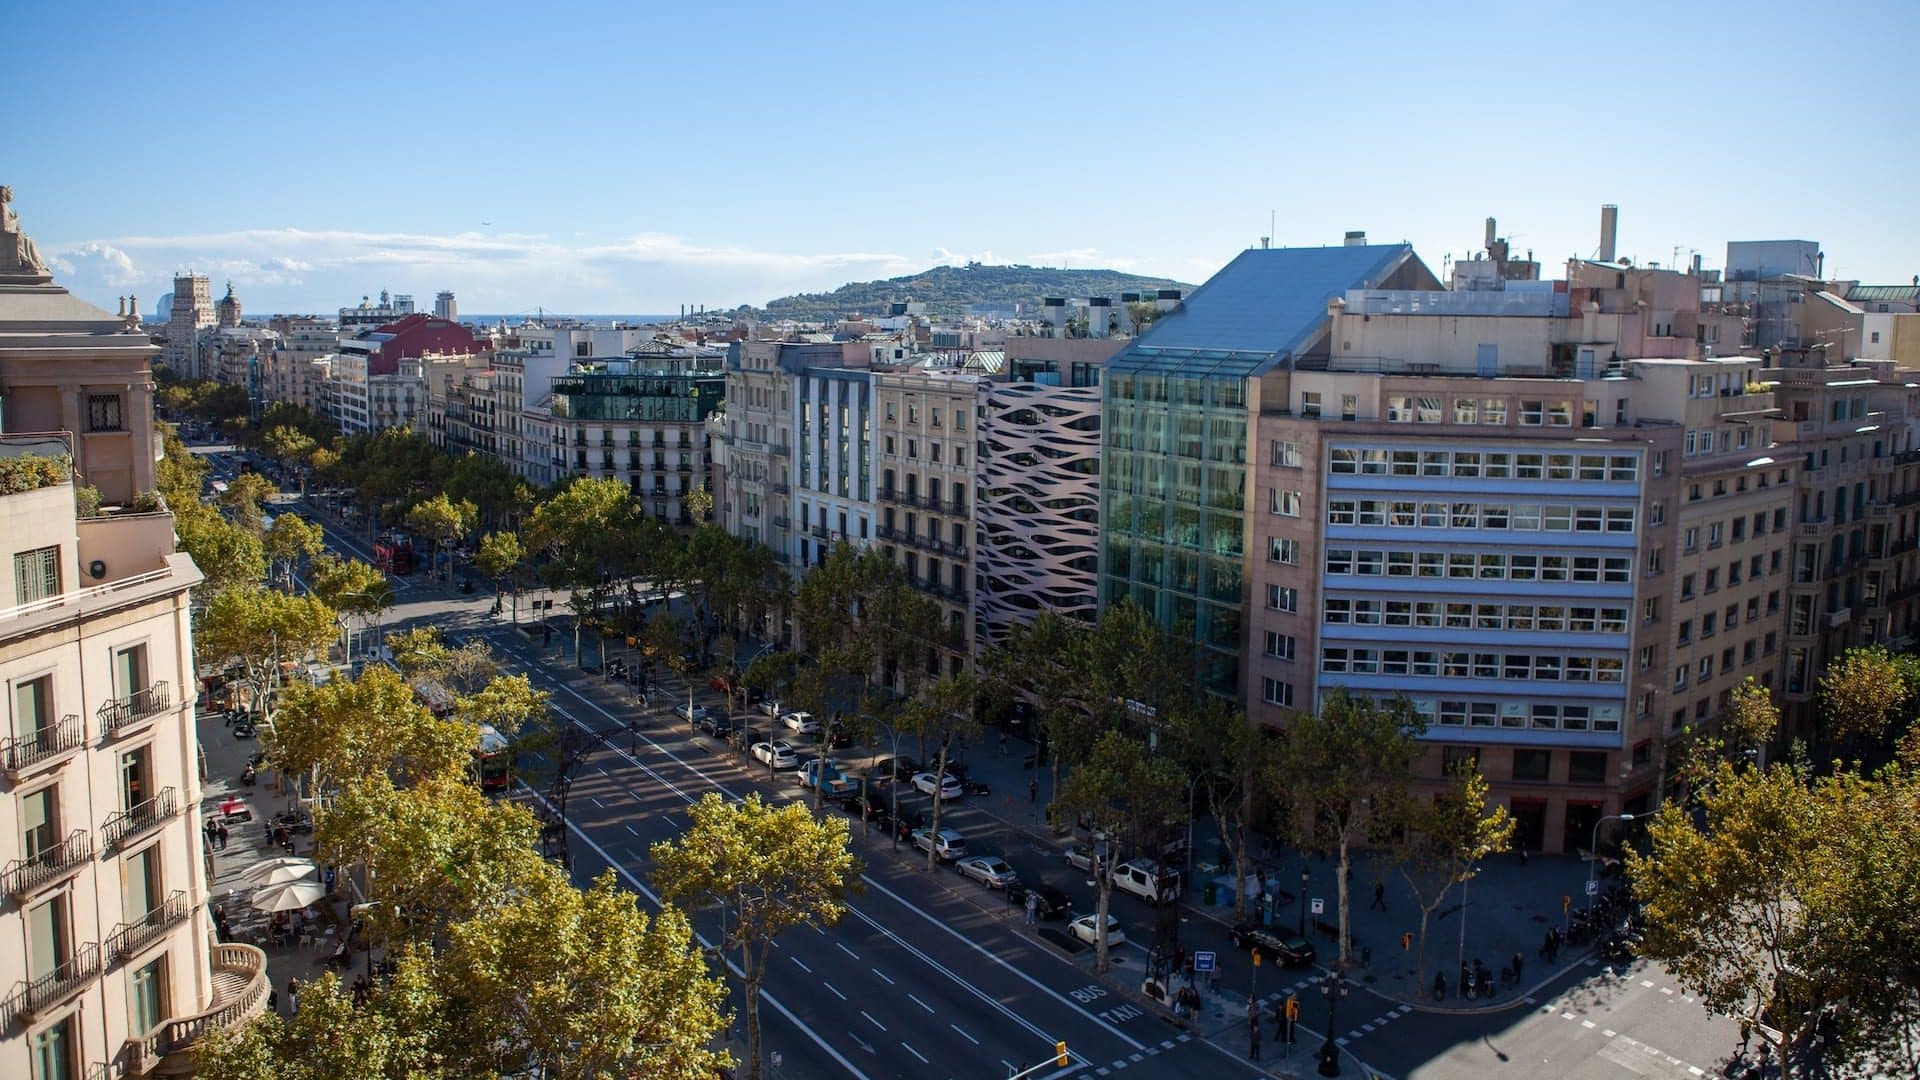 Home to some of Barcelona's most upscale shops, hotels and restaurants, Paseo de Gracia is one of the most famous streets in the city